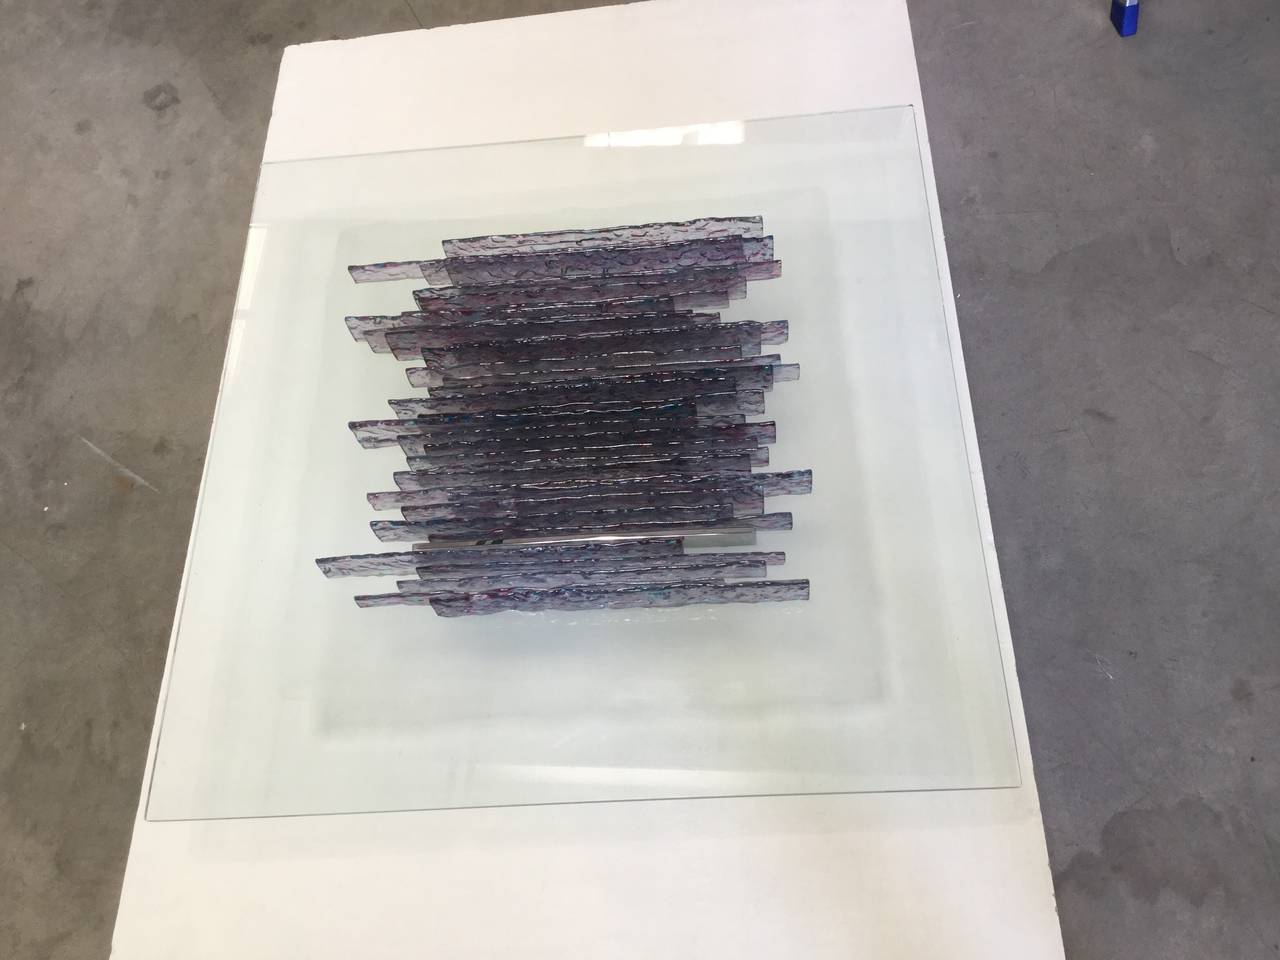 Beautiful cut crystal and frosted panel, it's surmounted by glass sheets iridescent amethyst, the frame is chrome metal with the label of the company Esperia, signature on the panel 